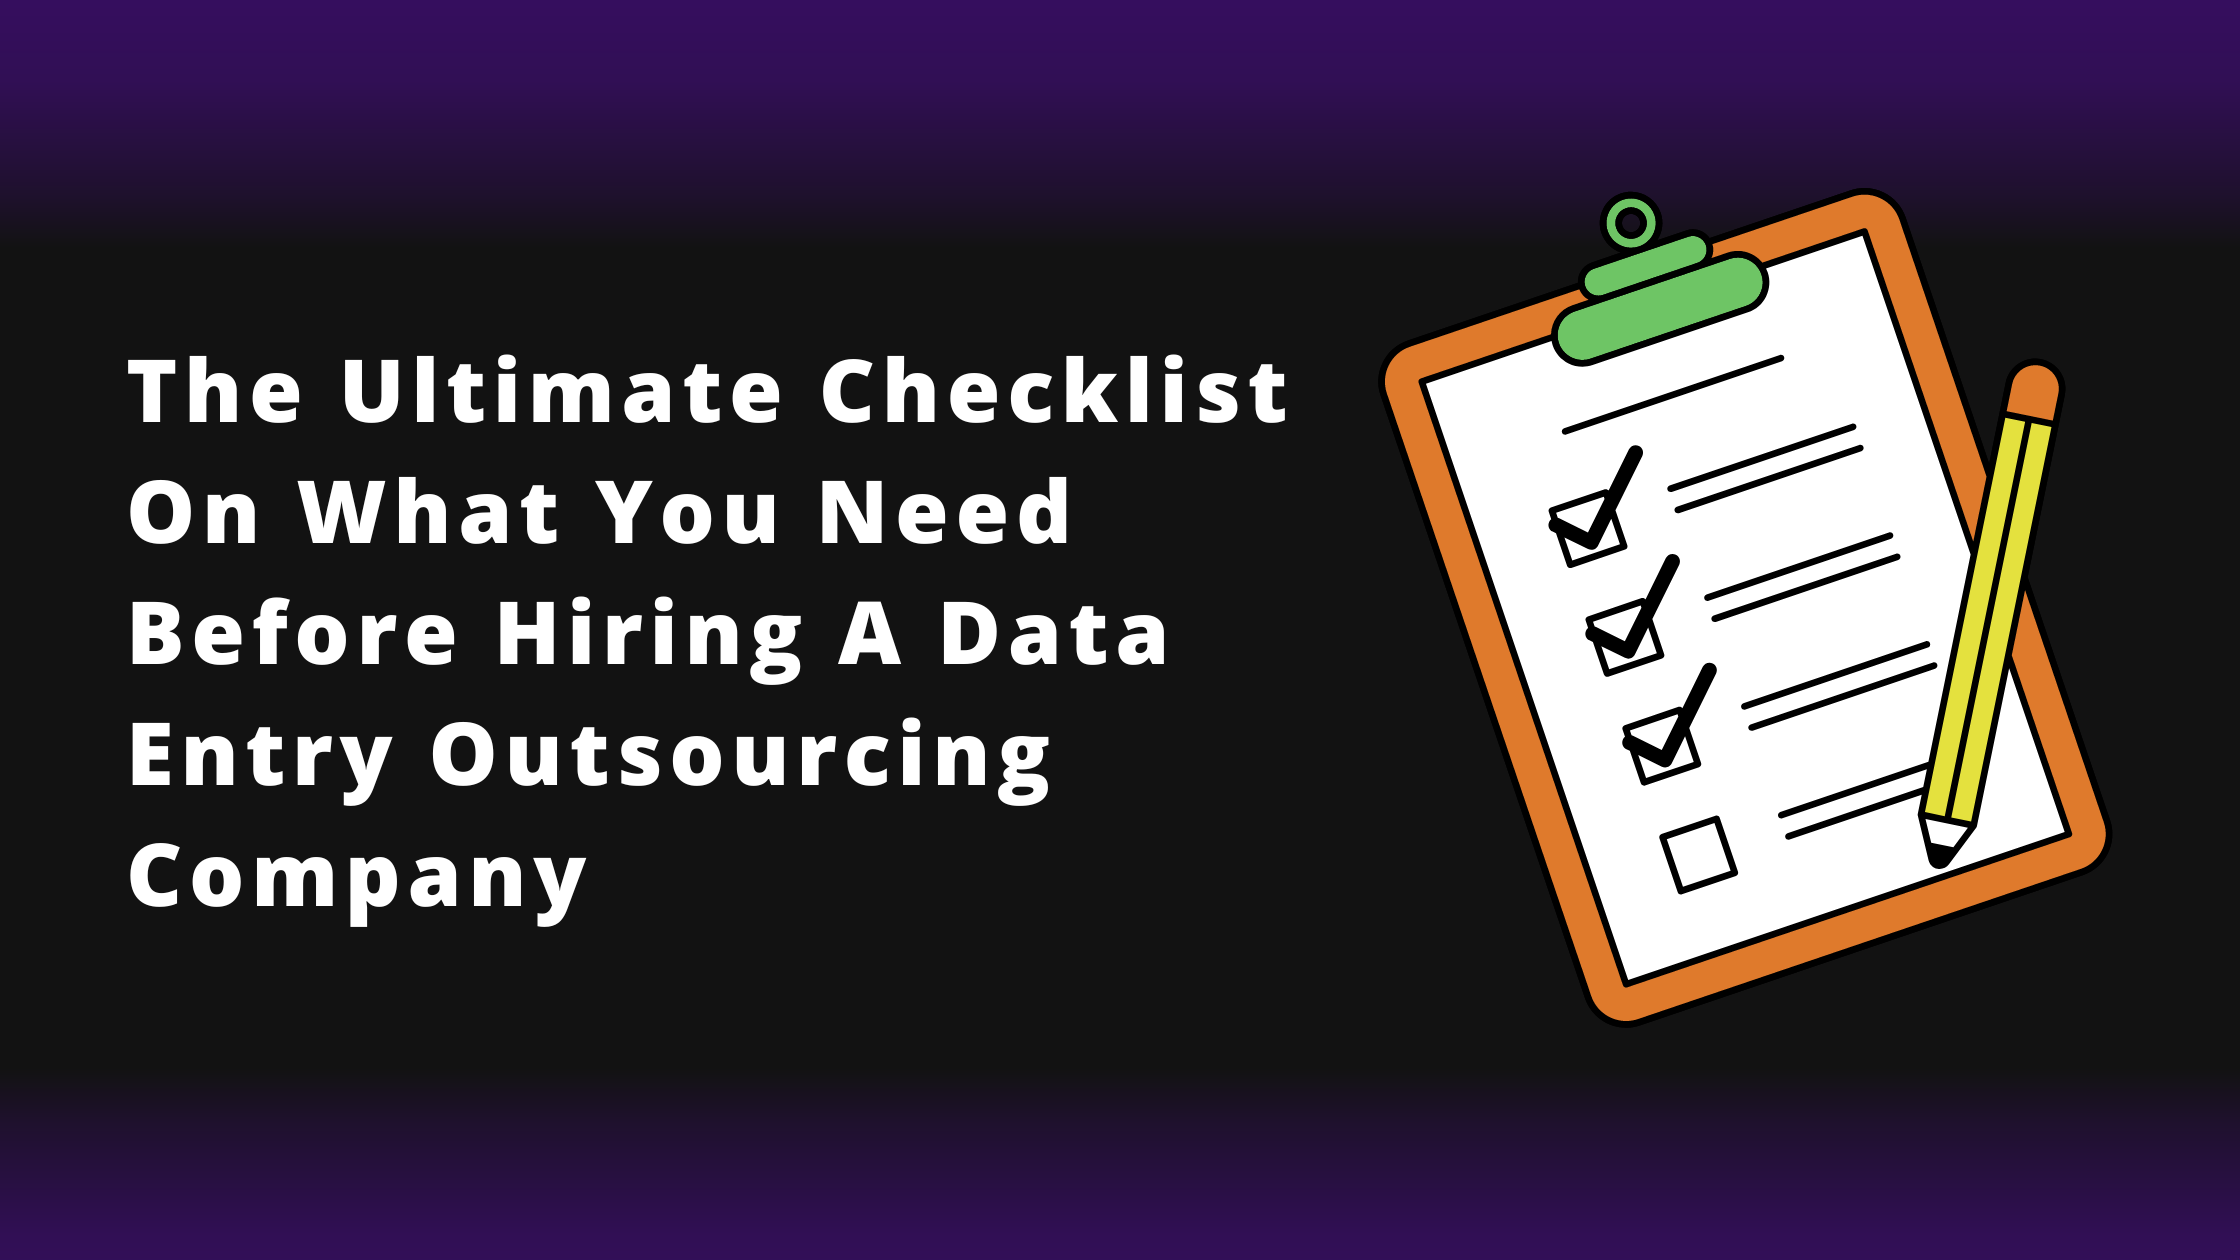 Hiring Data Entry Outsourcing Company? Follow This Ultimate Checklist